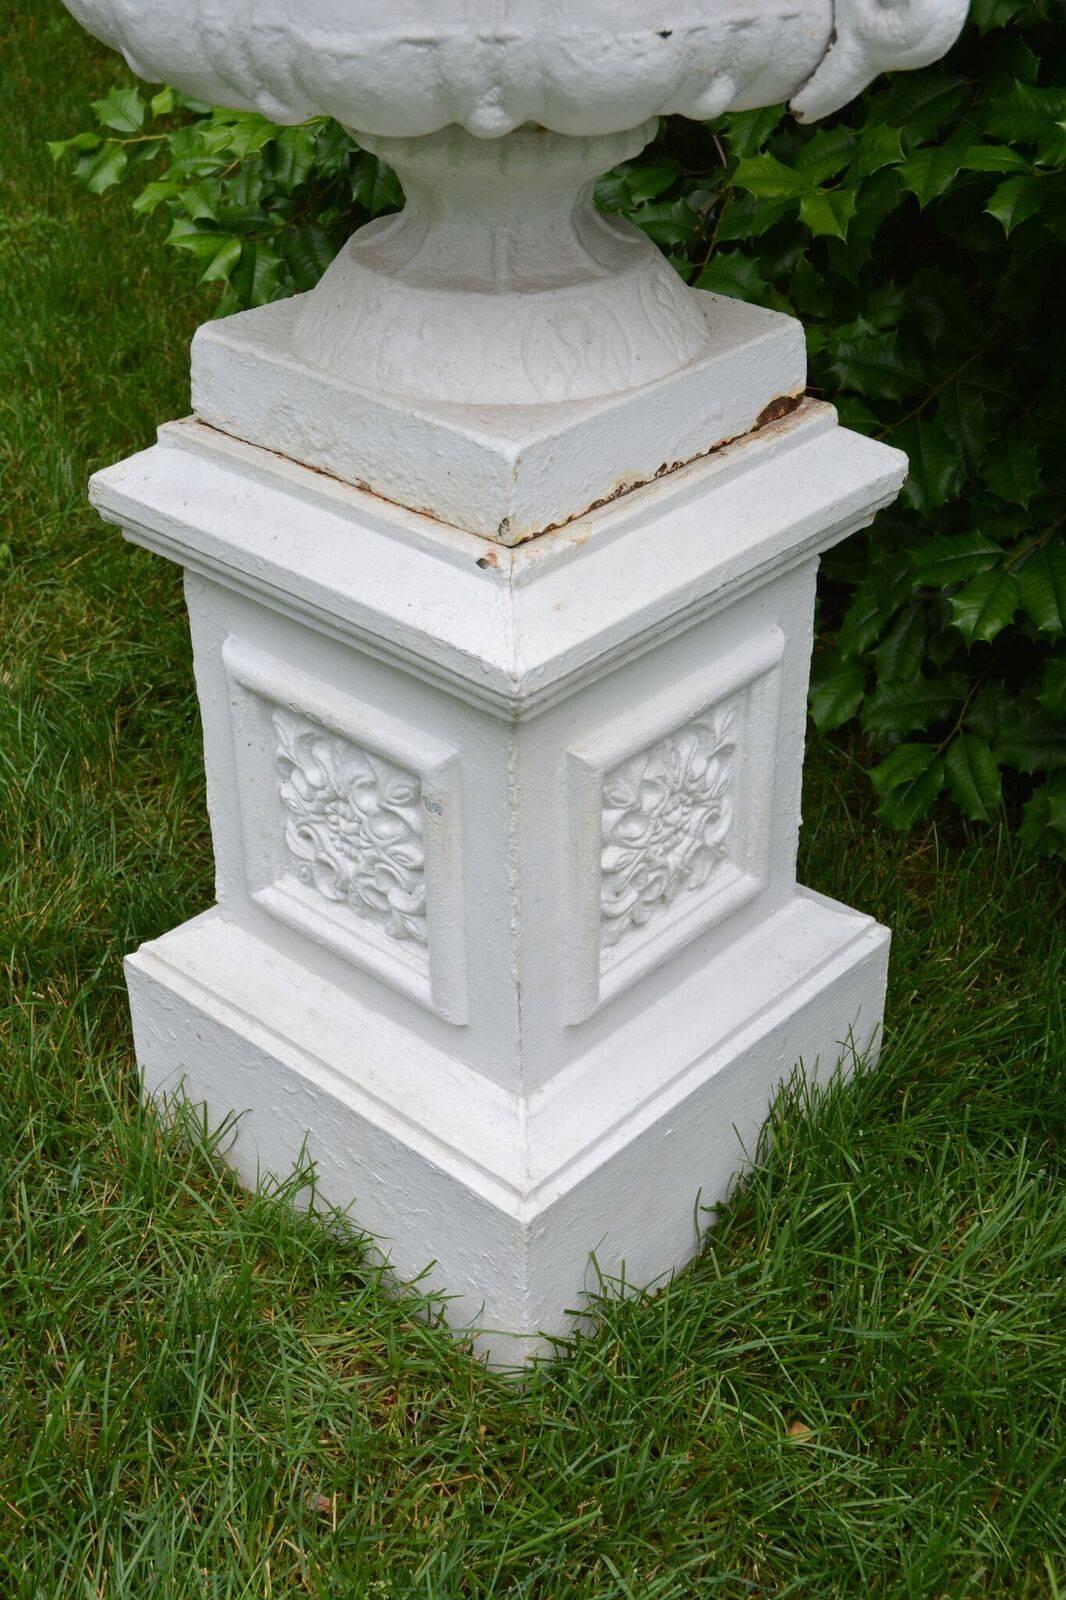 20th Century A Pair of White Painted Cast-Iron Urns on Pedestals